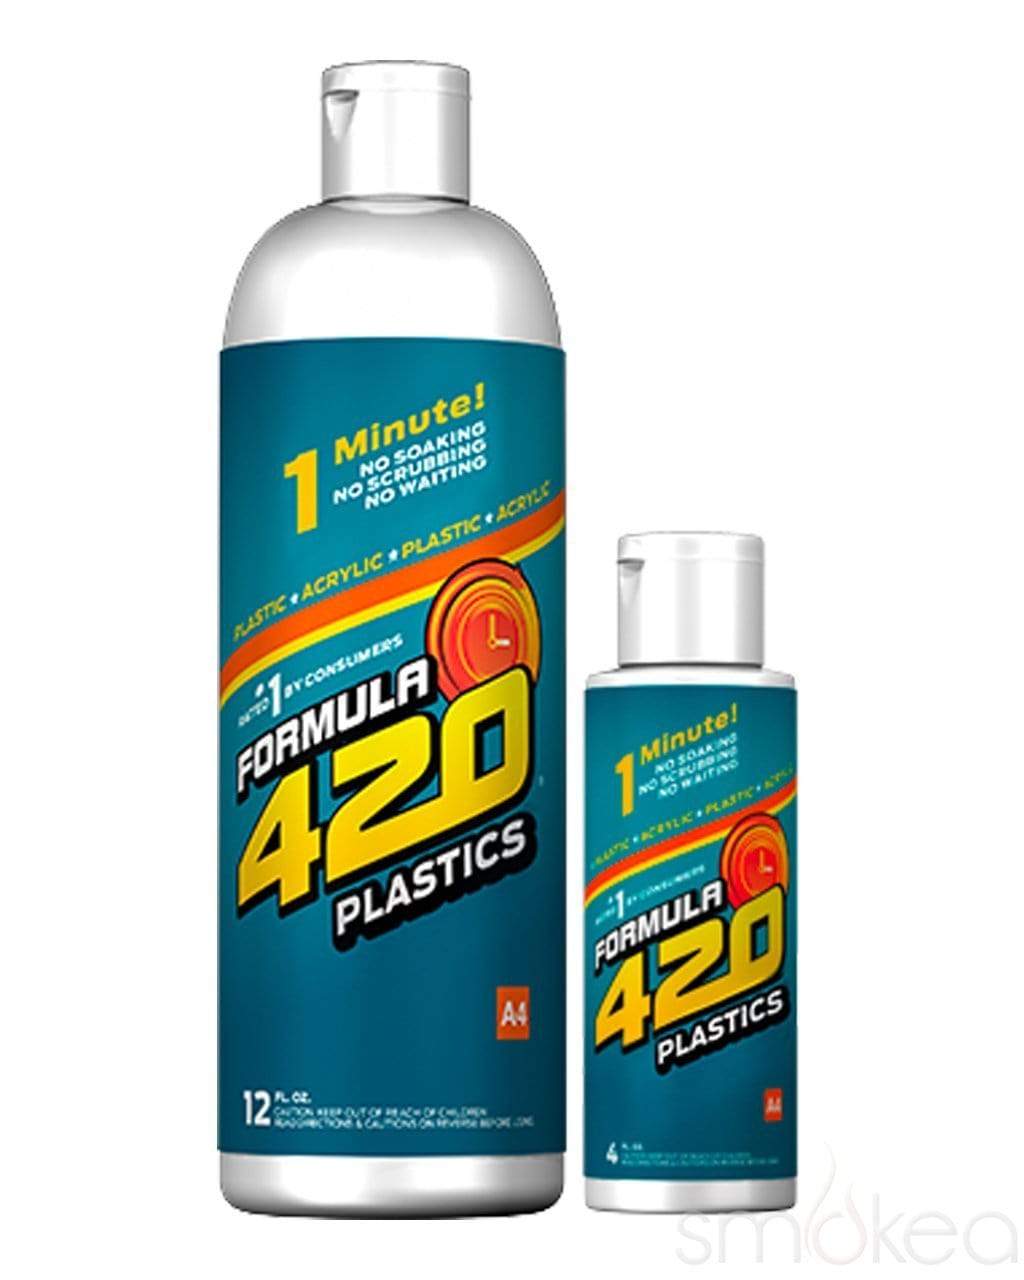 420 Cleaner by Formula 420, Ultimate Glass Cleaner